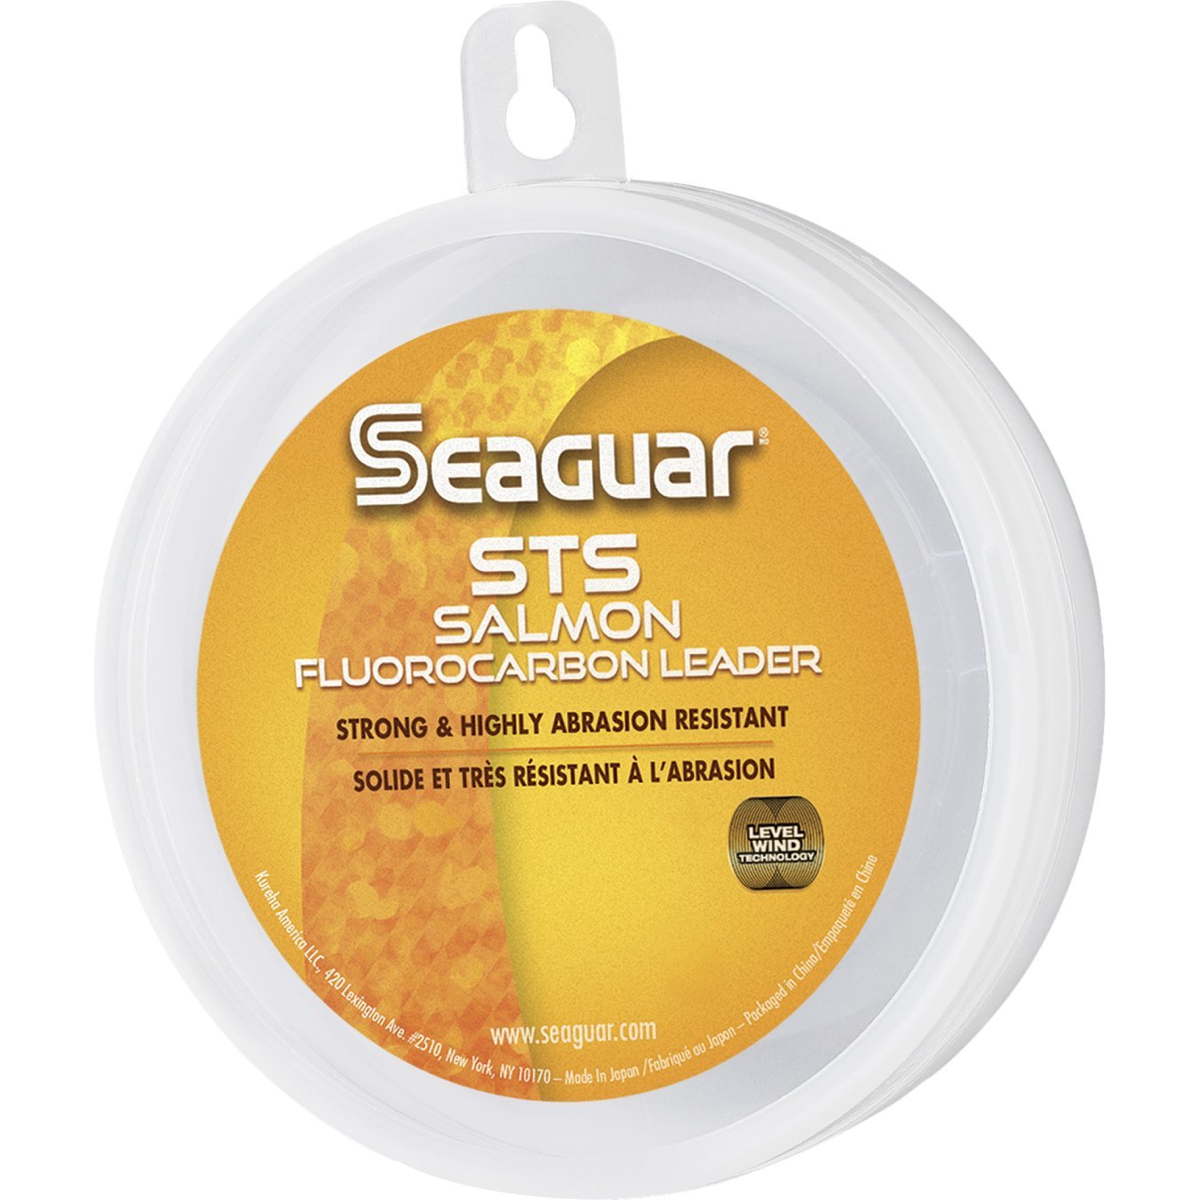 Photo of Seaguar STS Trout/Steelhead Fluorocarbon Leader Material for sale at United Tackle Shops.